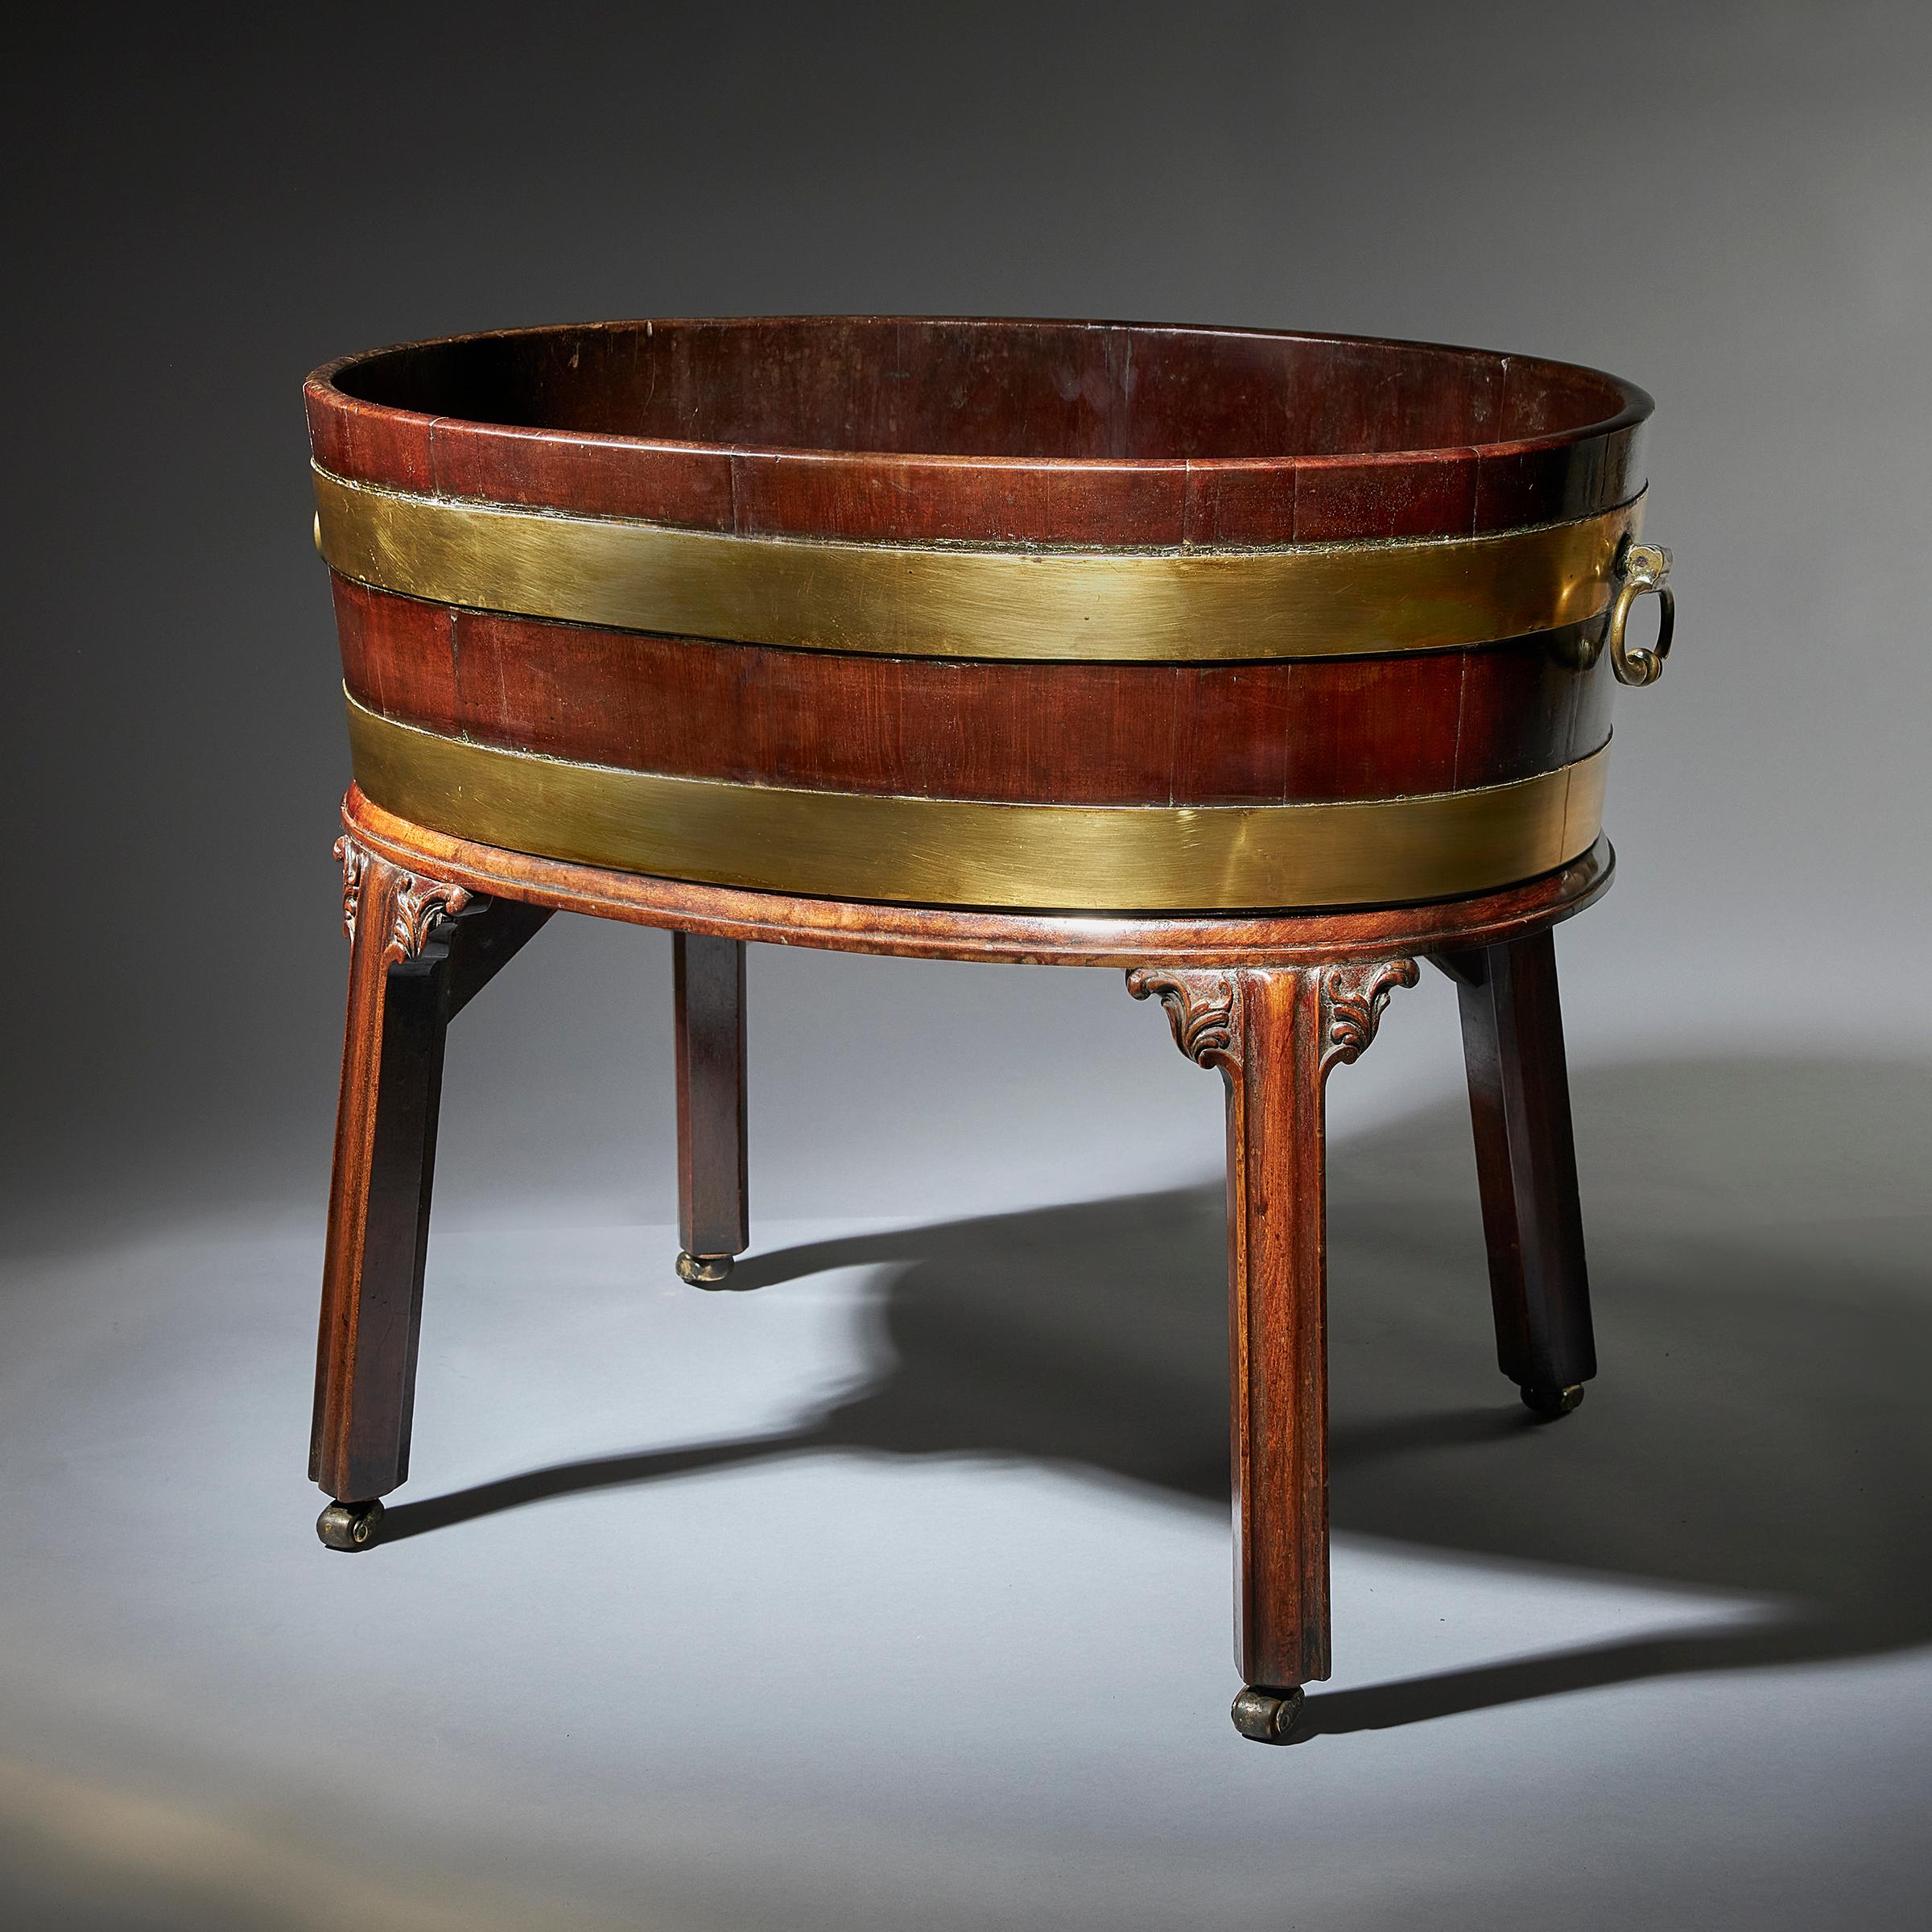 A fine and large mid-18th century George III oval mahogany cellarette or wine cooler on original stand in the manner of Thomas Chippendale. 

Raised on four moulded outswept legs fitted with casters and carved ears of acanthus. The oval body of